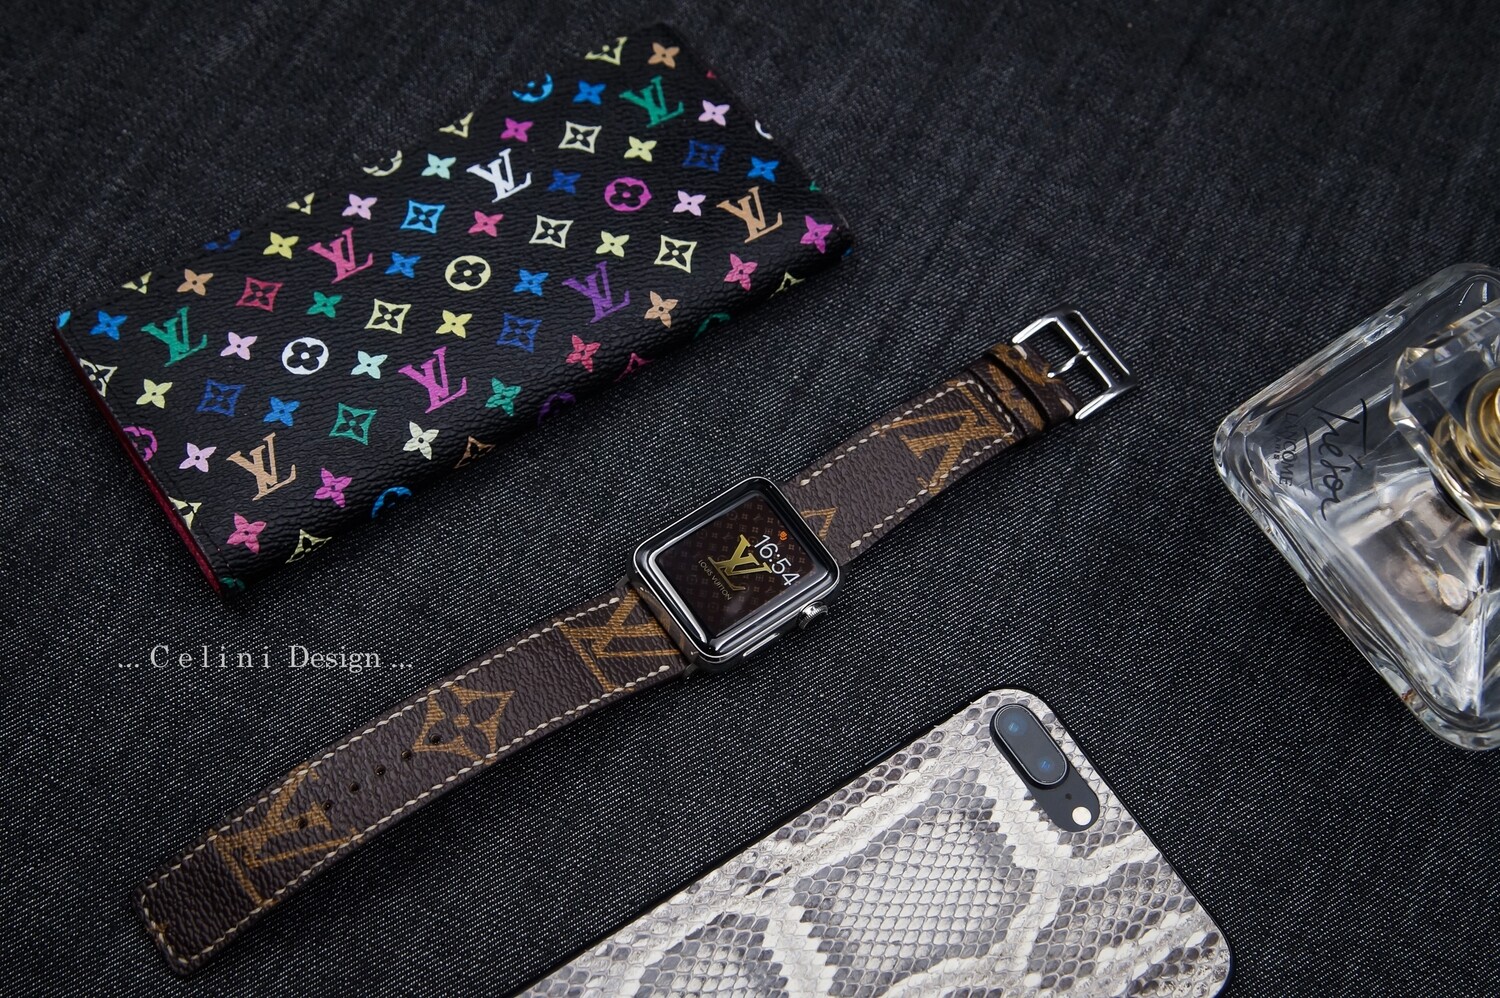 Luxury Duo Colour Leather Apple Watch Band